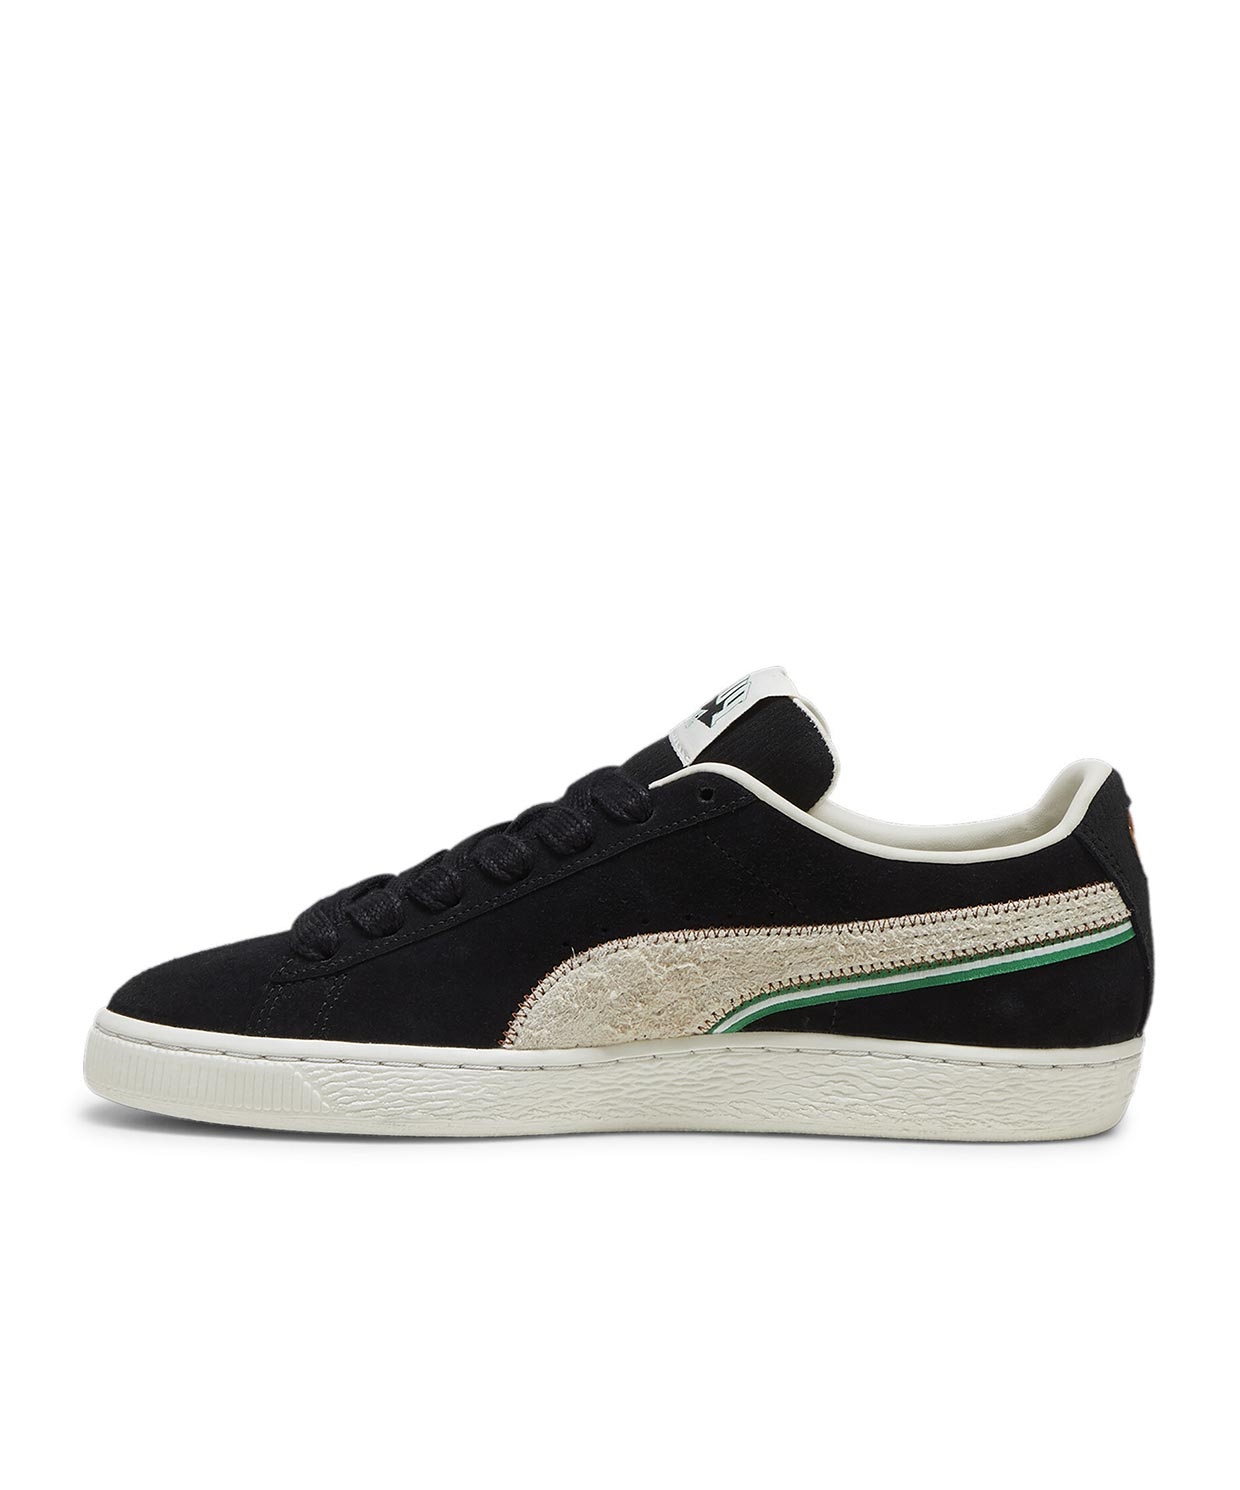 resm Puma Suede For the Fanbase